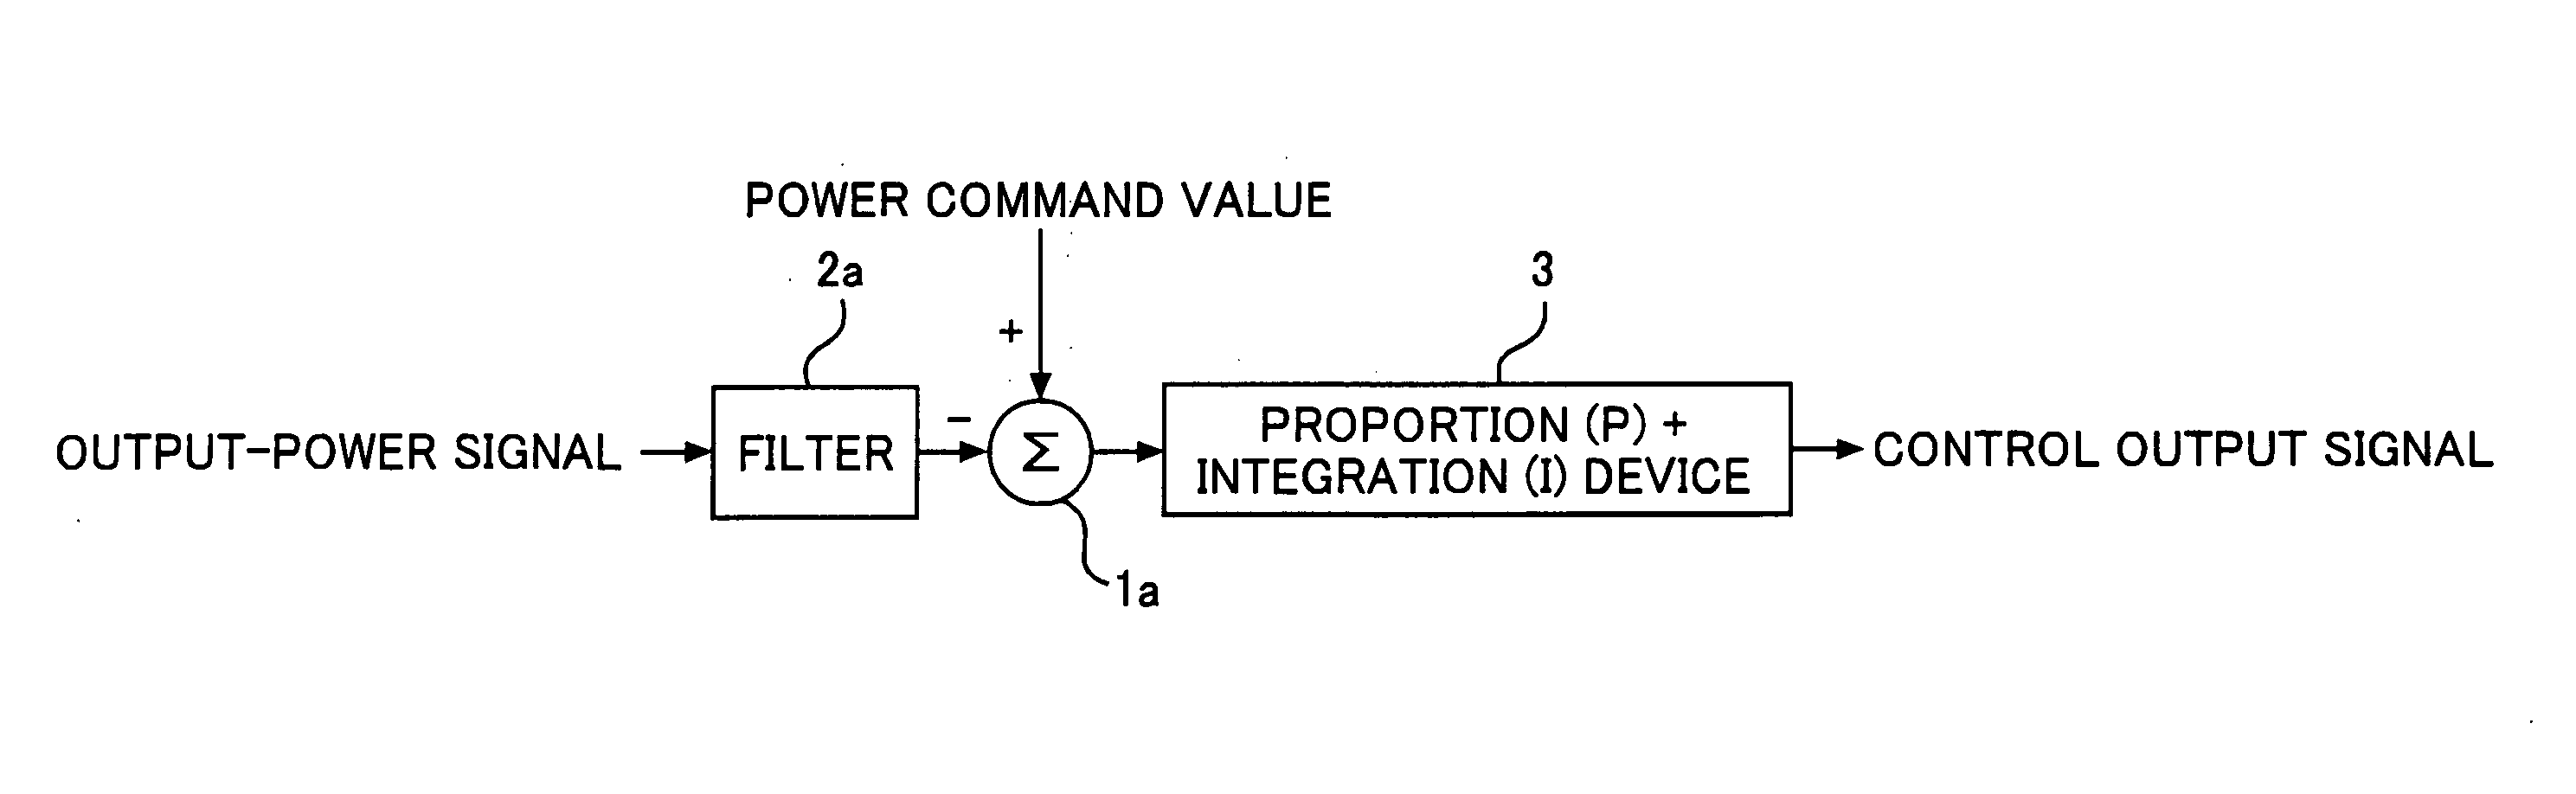 Prime mover output control system